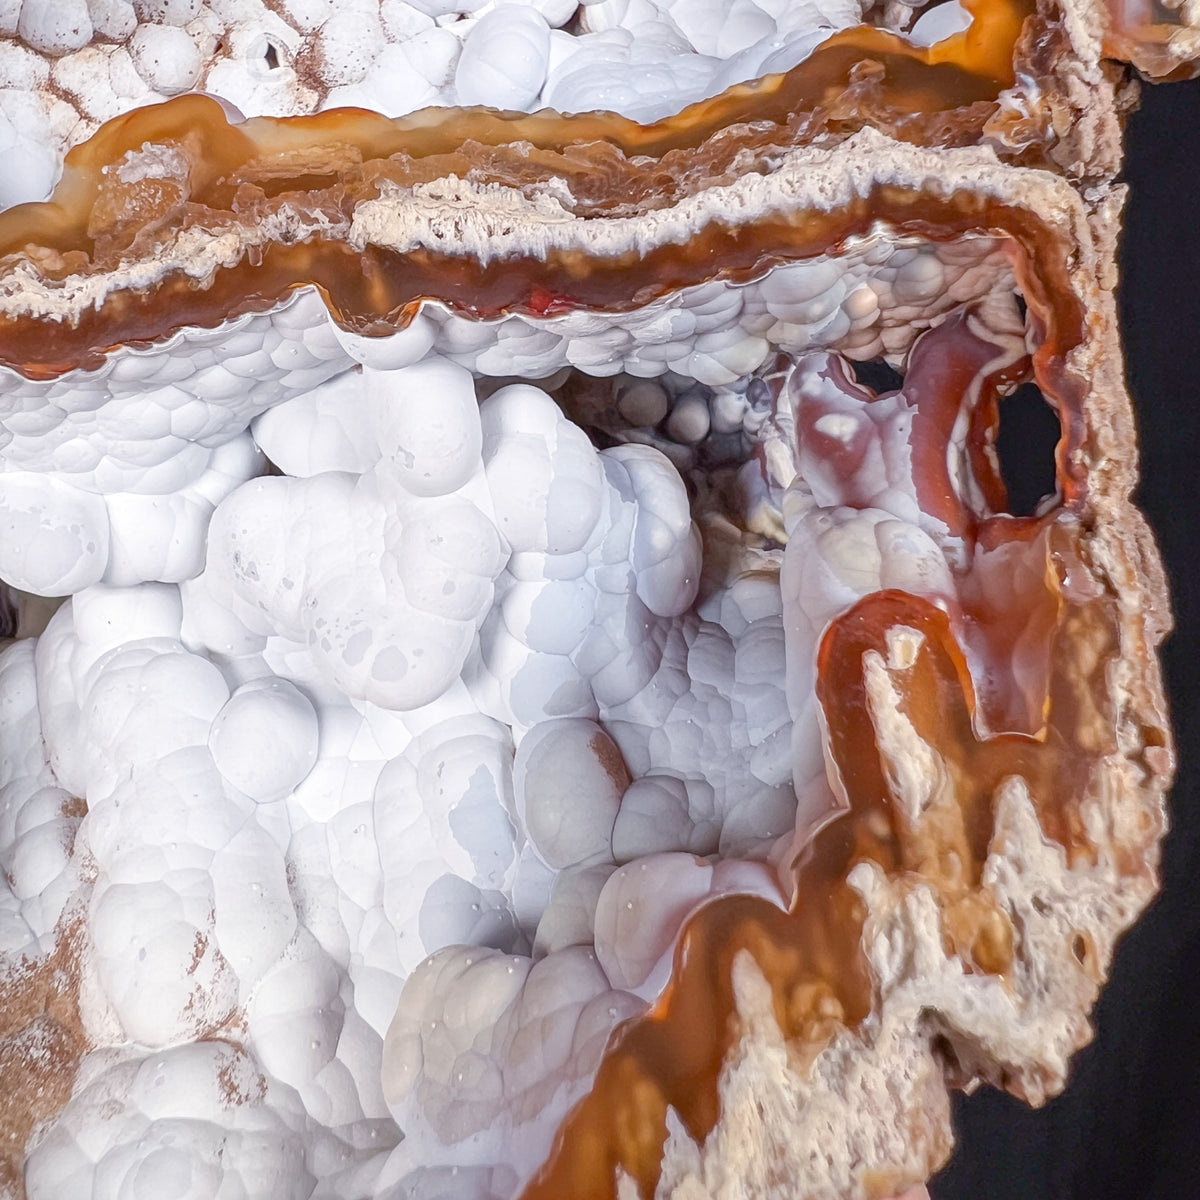 Botryoidal Chalcedony crystals inside Fossilized Coral